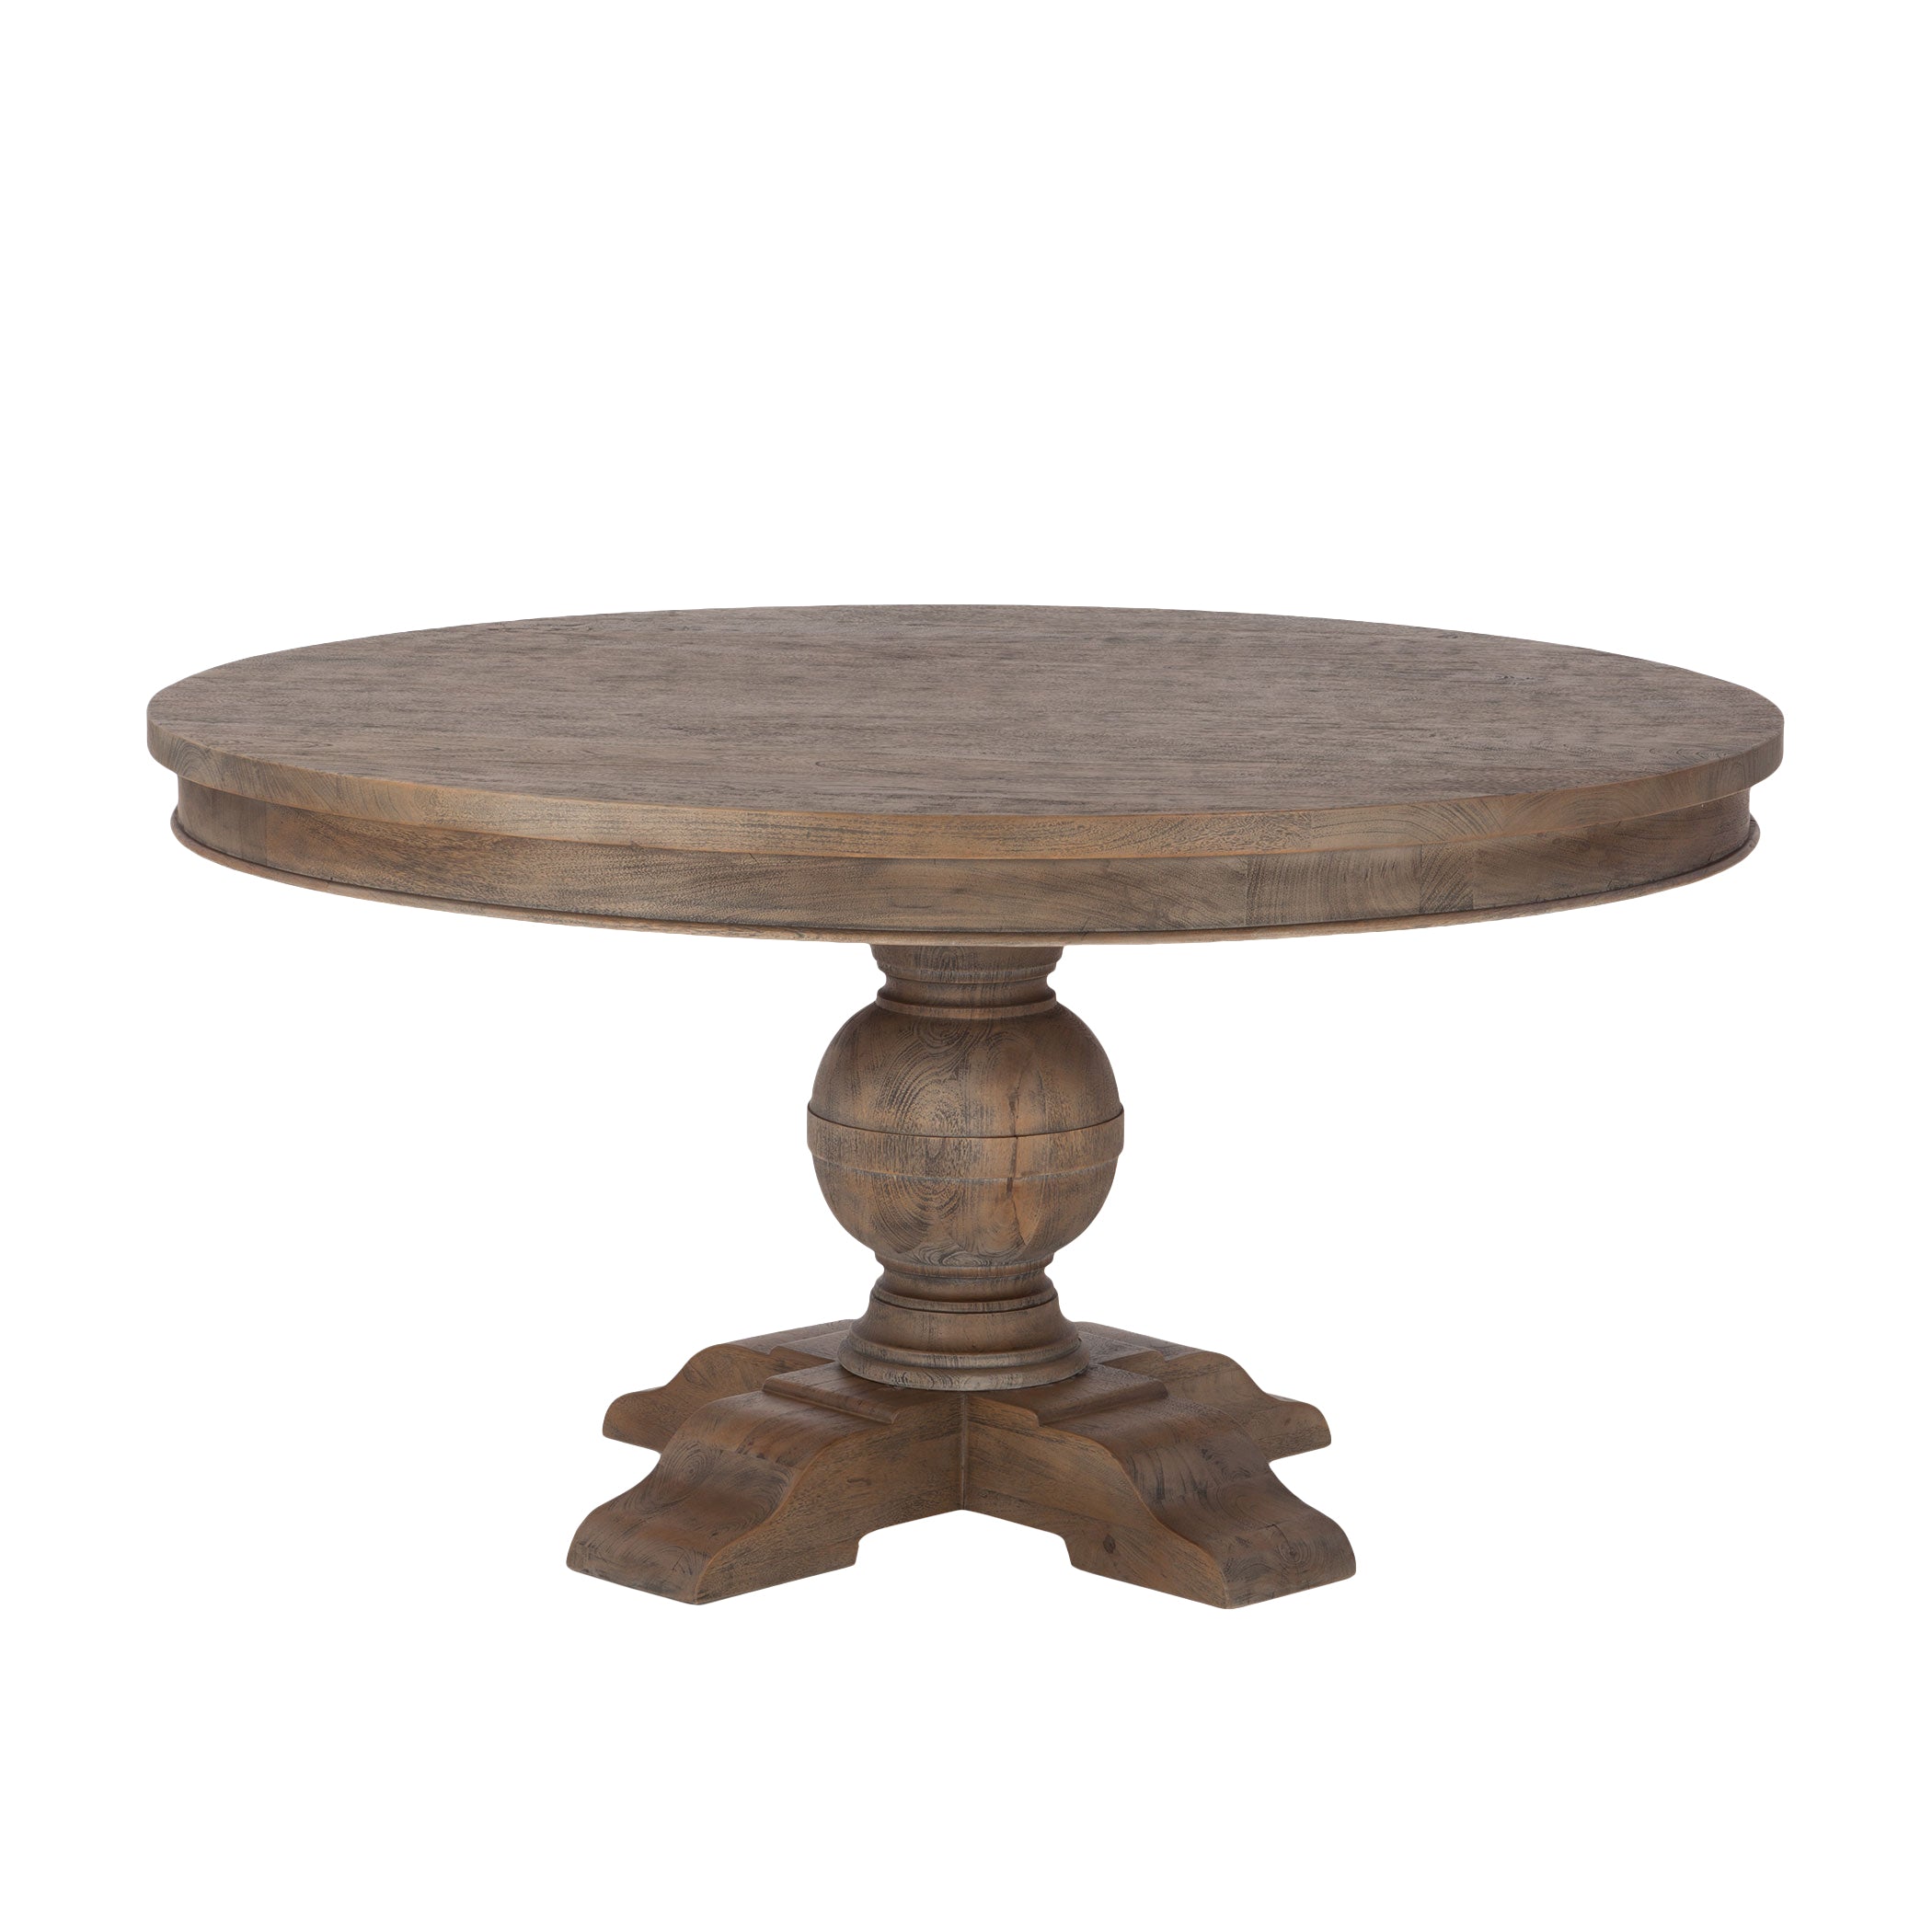 Chatham Downs Round Dining Table